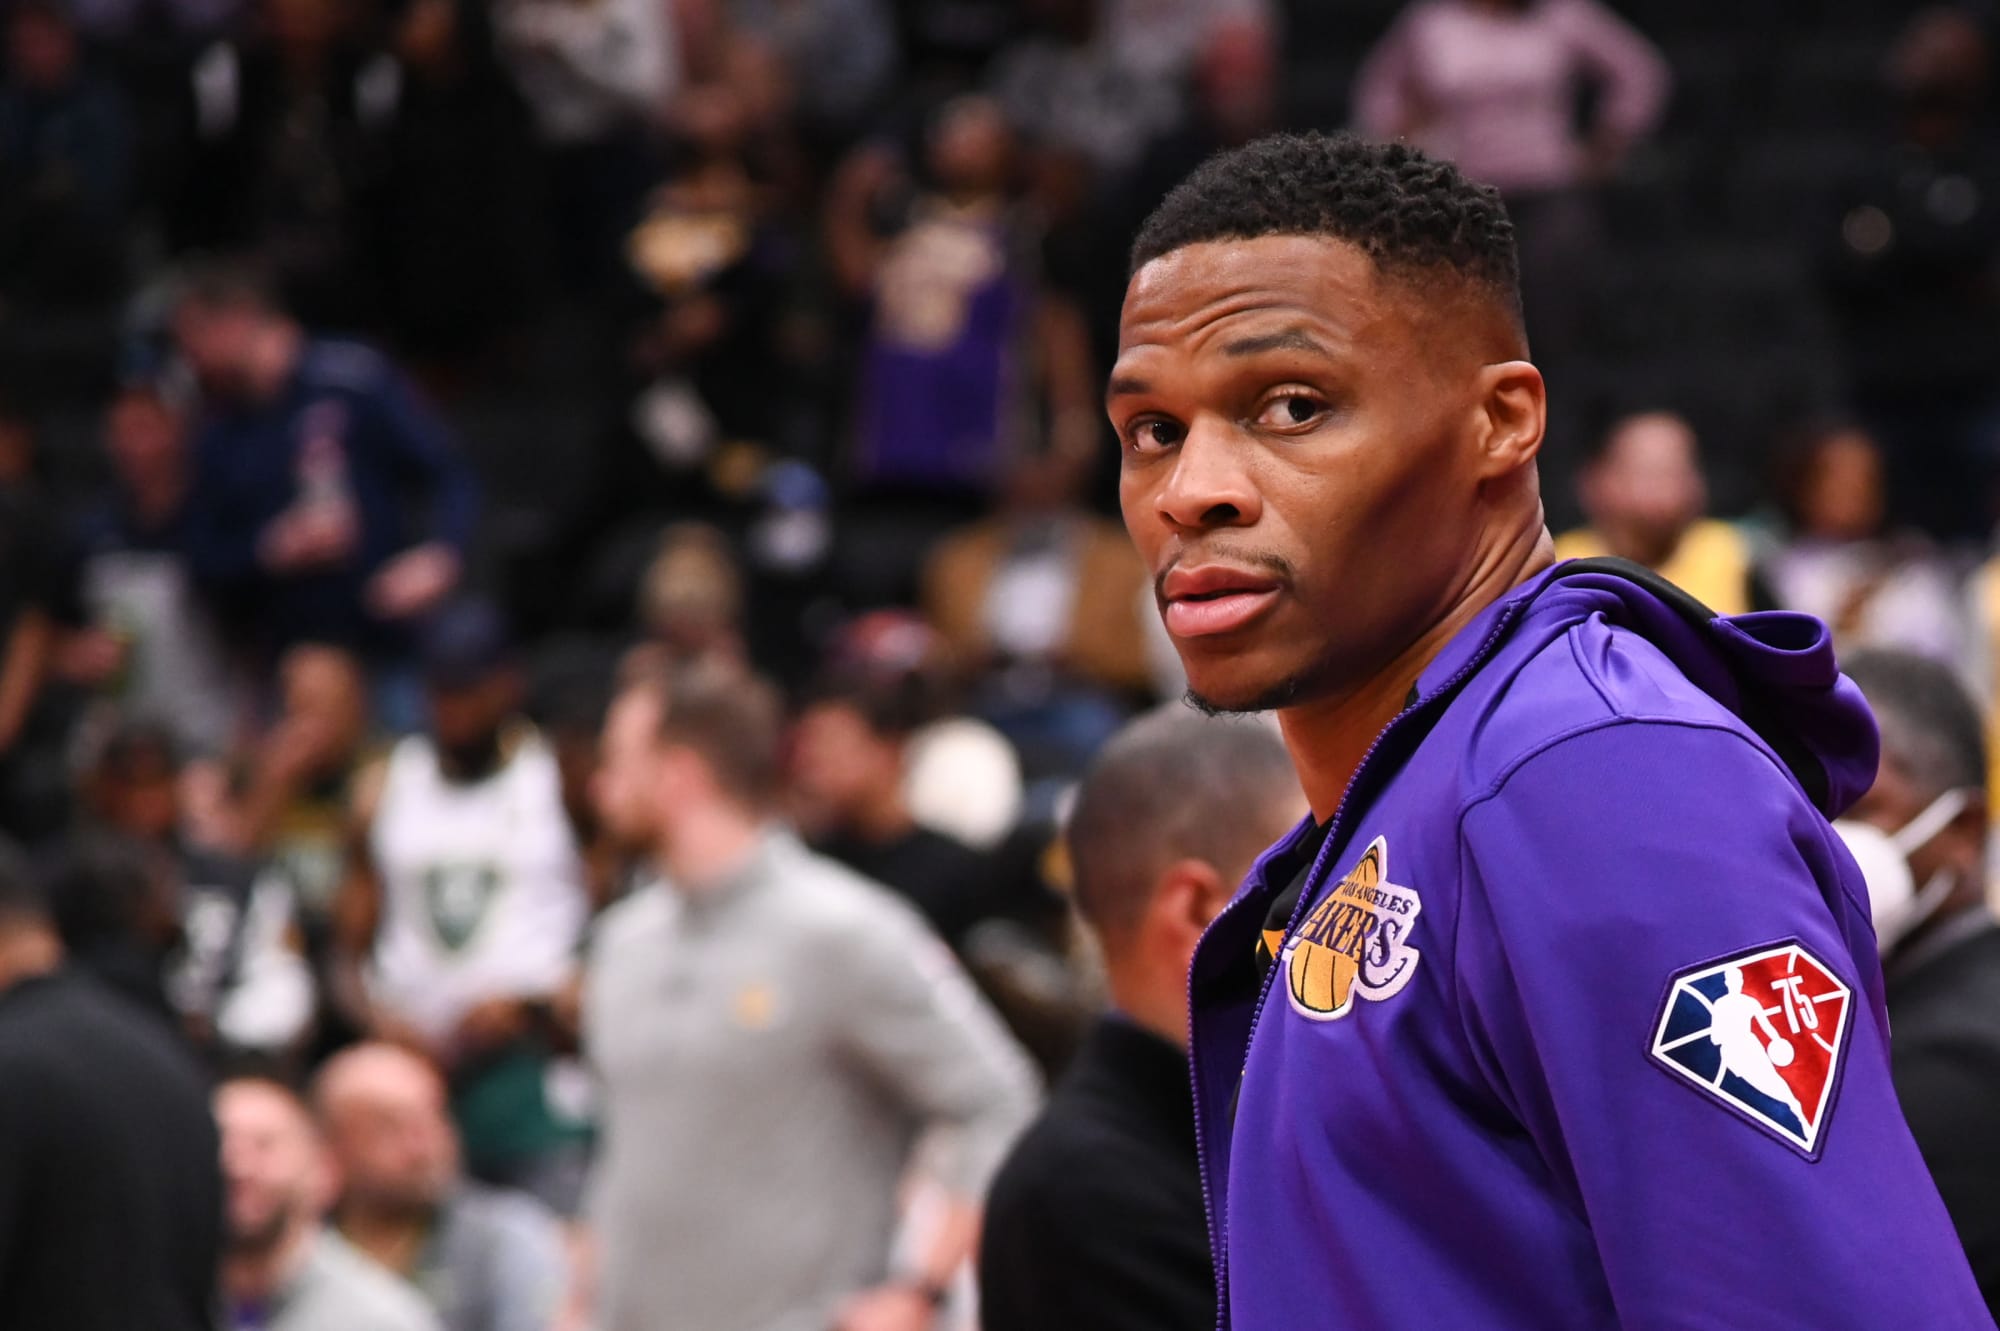 Russell Westbrook business rumors: 2 early favorites have emerged